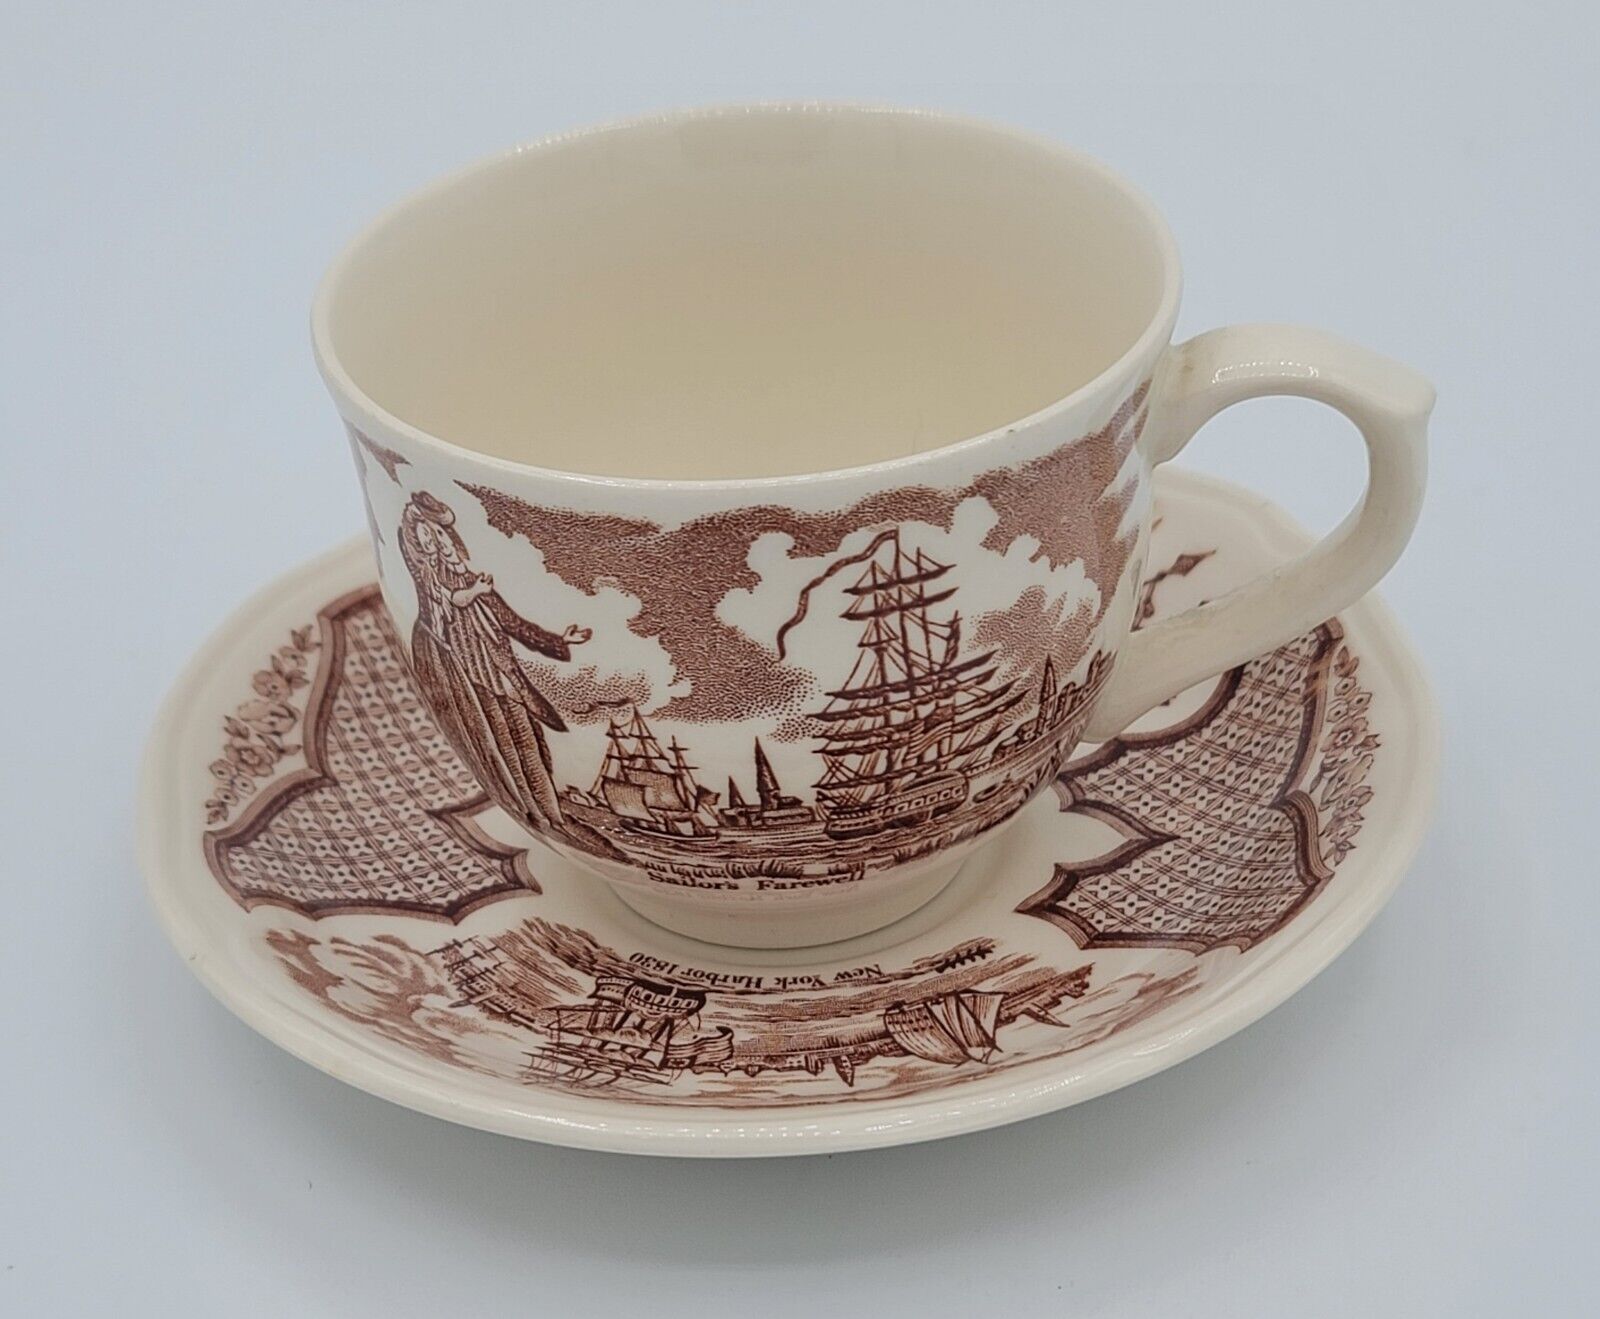 Vintage Fair Winds Teacup & Saucer Made by Alfred Meakin Staffordshire England